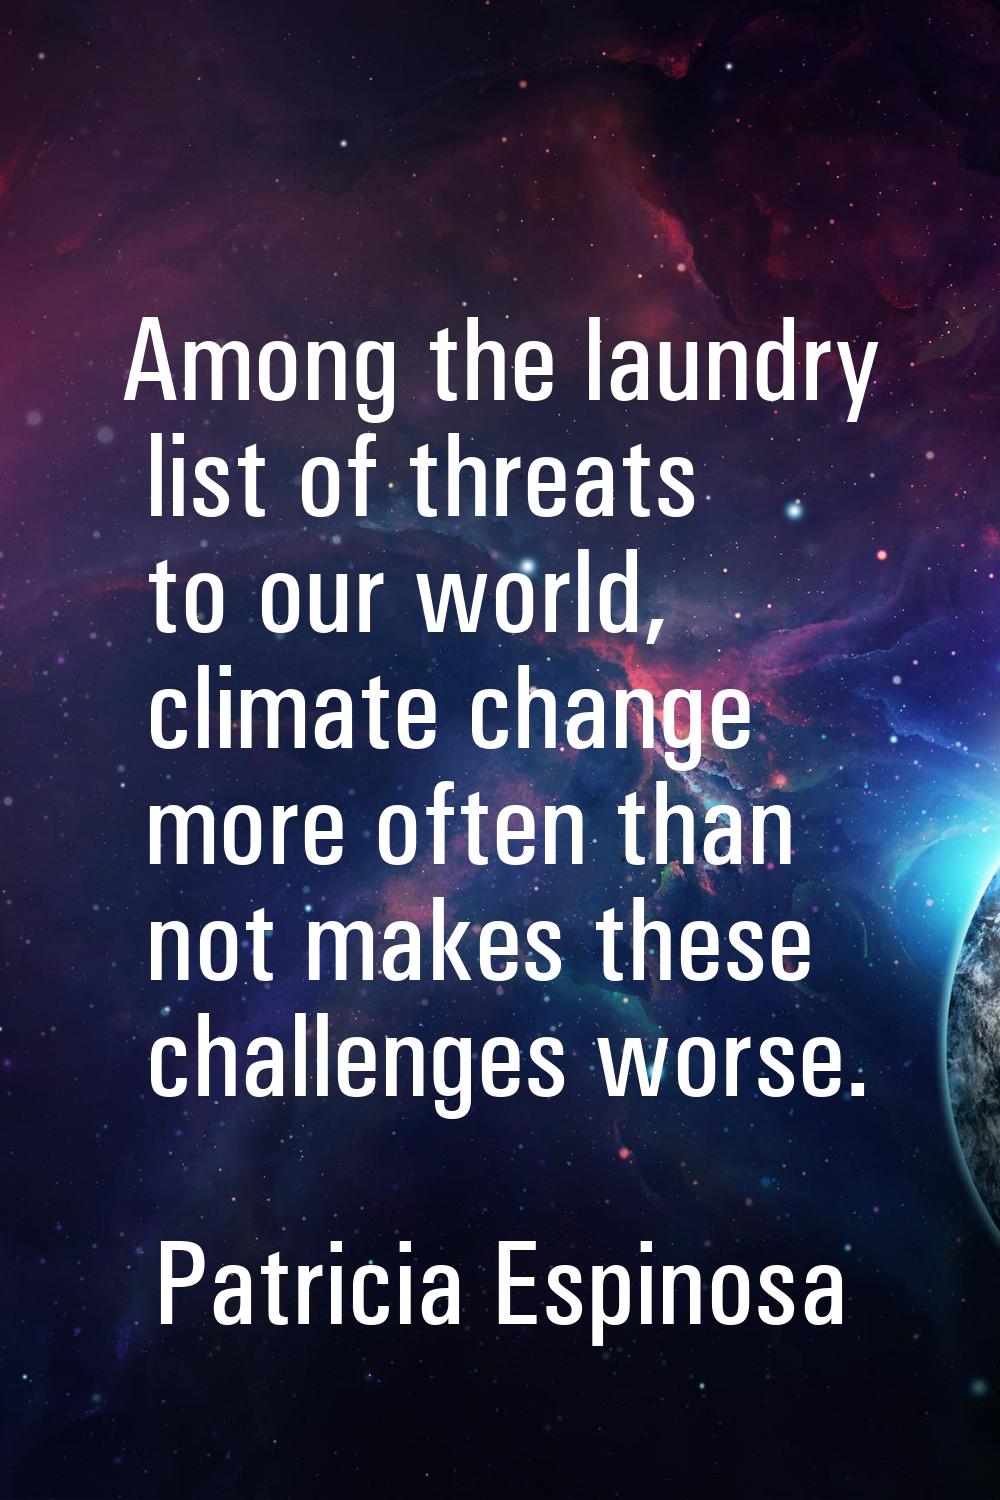 Among the laundry list of threats to our world, climate change more often than not makes these chal